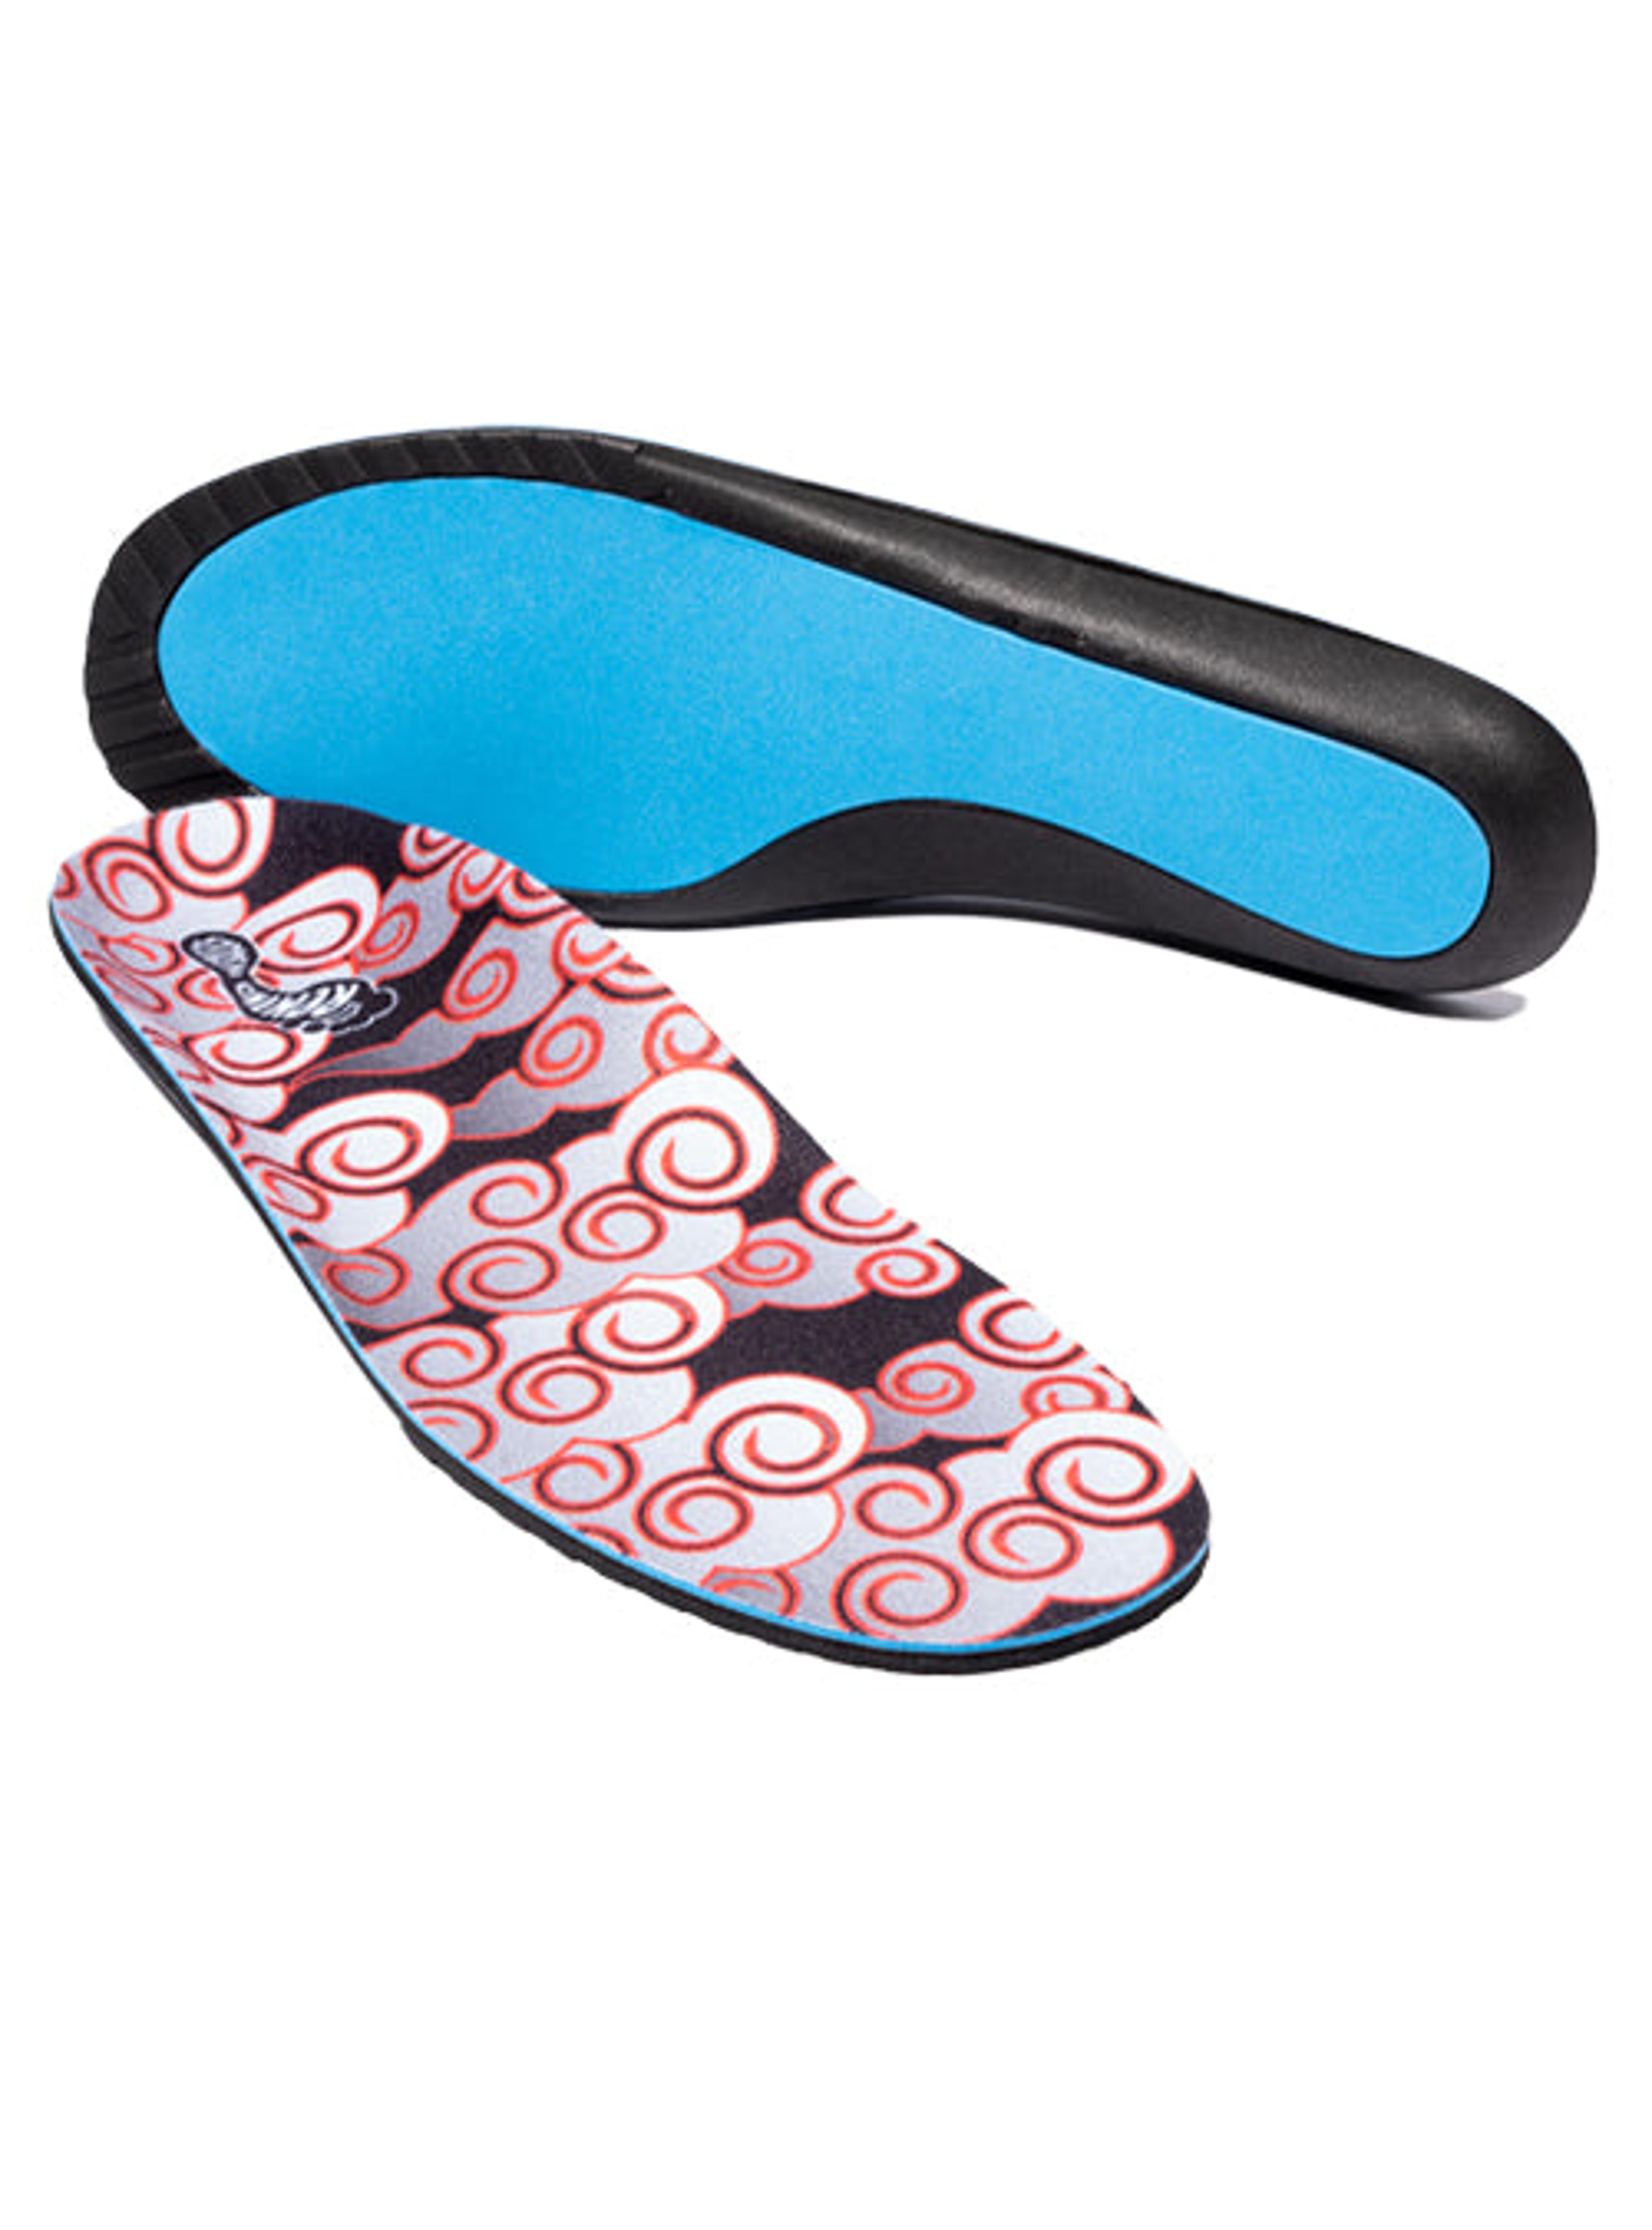 Alternate View 1 of MEDIC CLASSIC 5MM Mid-High Arch | Clouds Insoles